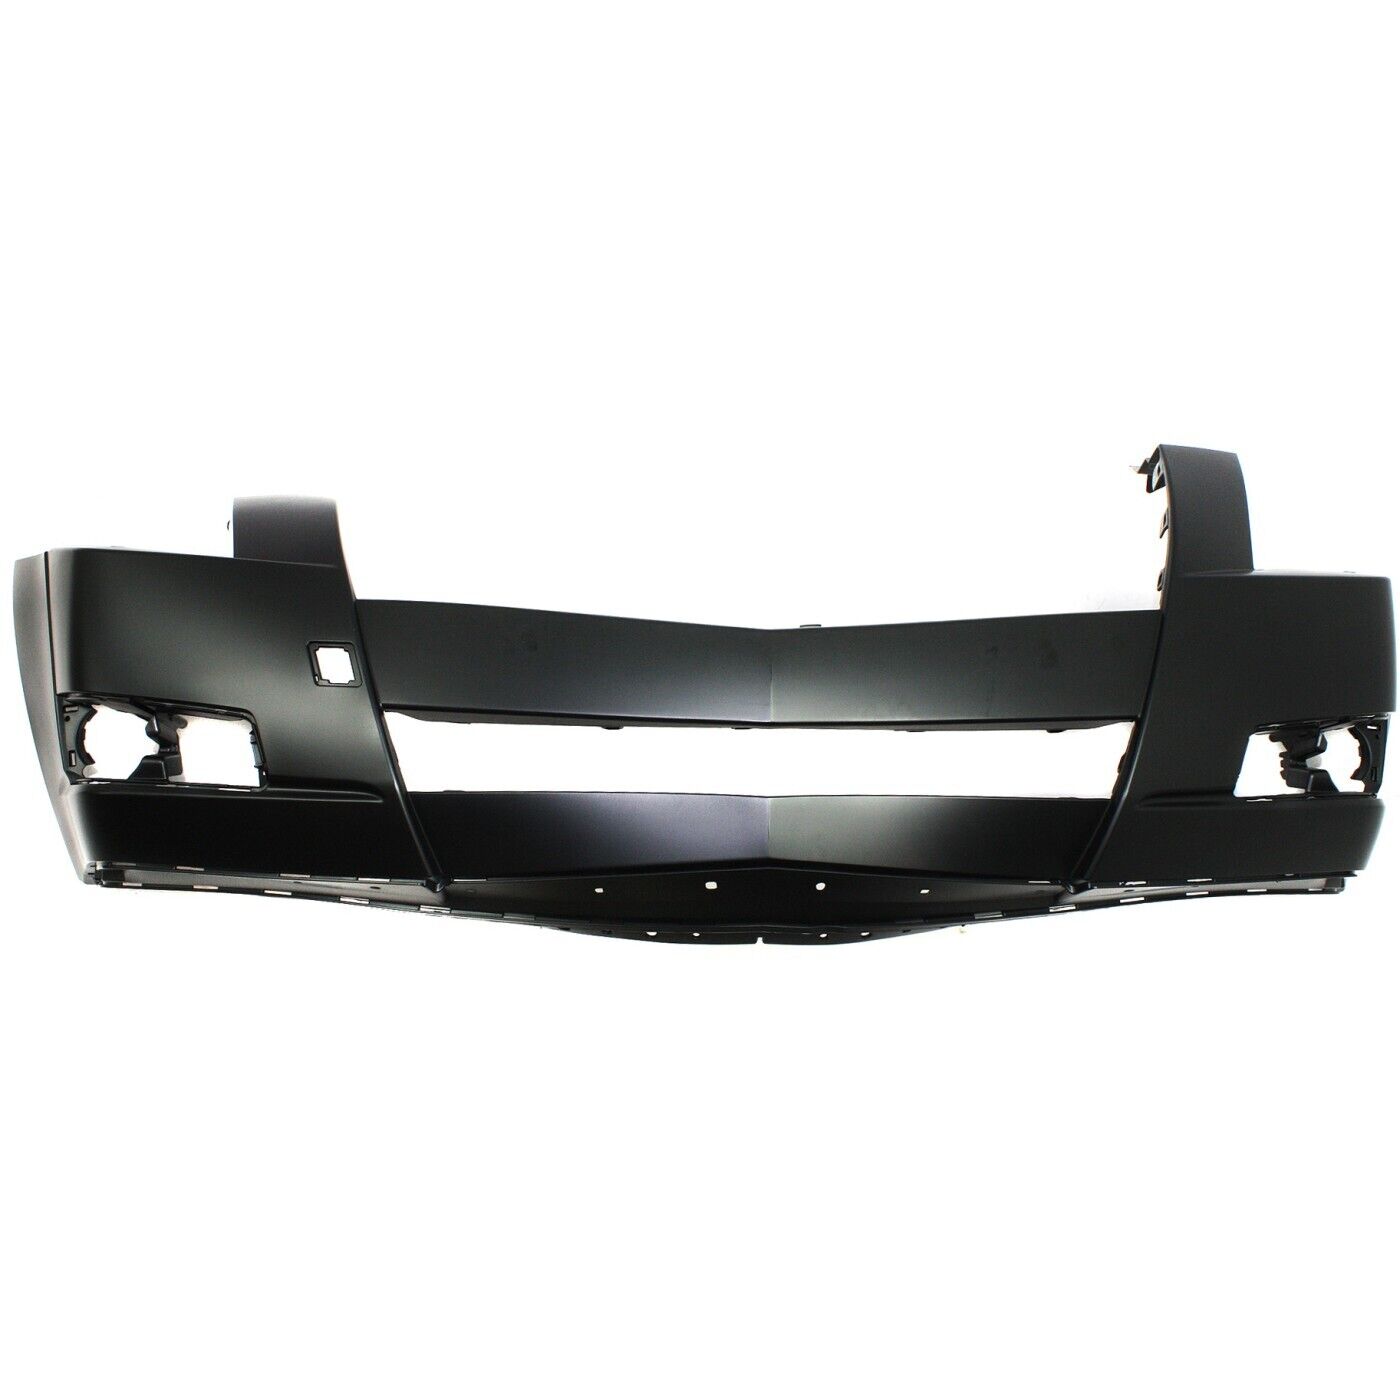 Front Bumper Cover For 2008-2015 Cadillac CTS w/ fog lamp holes Primed